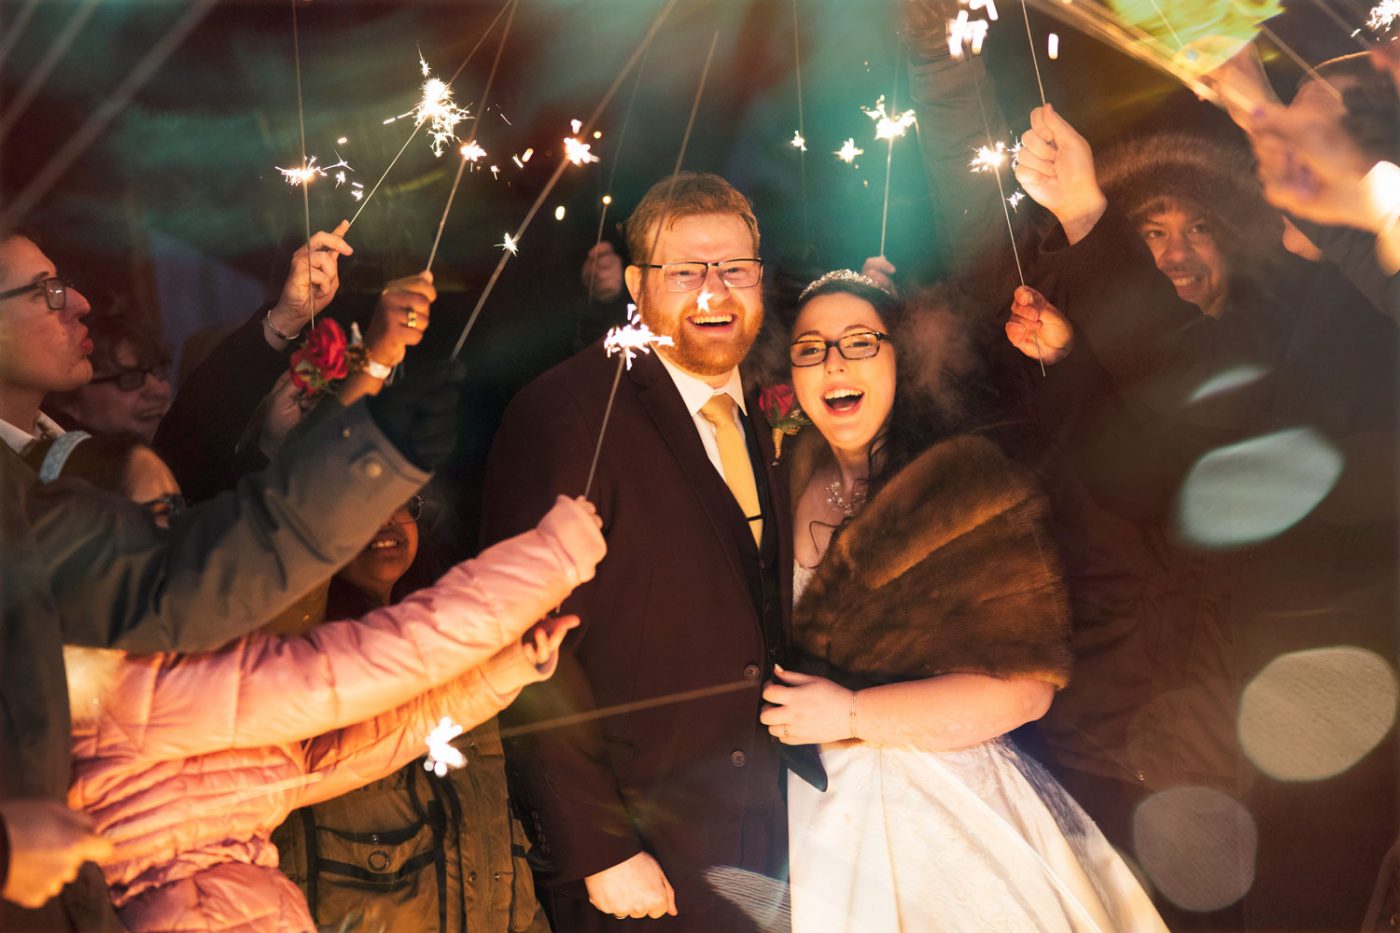 The couple surrounded by sparklers in the middle of winter